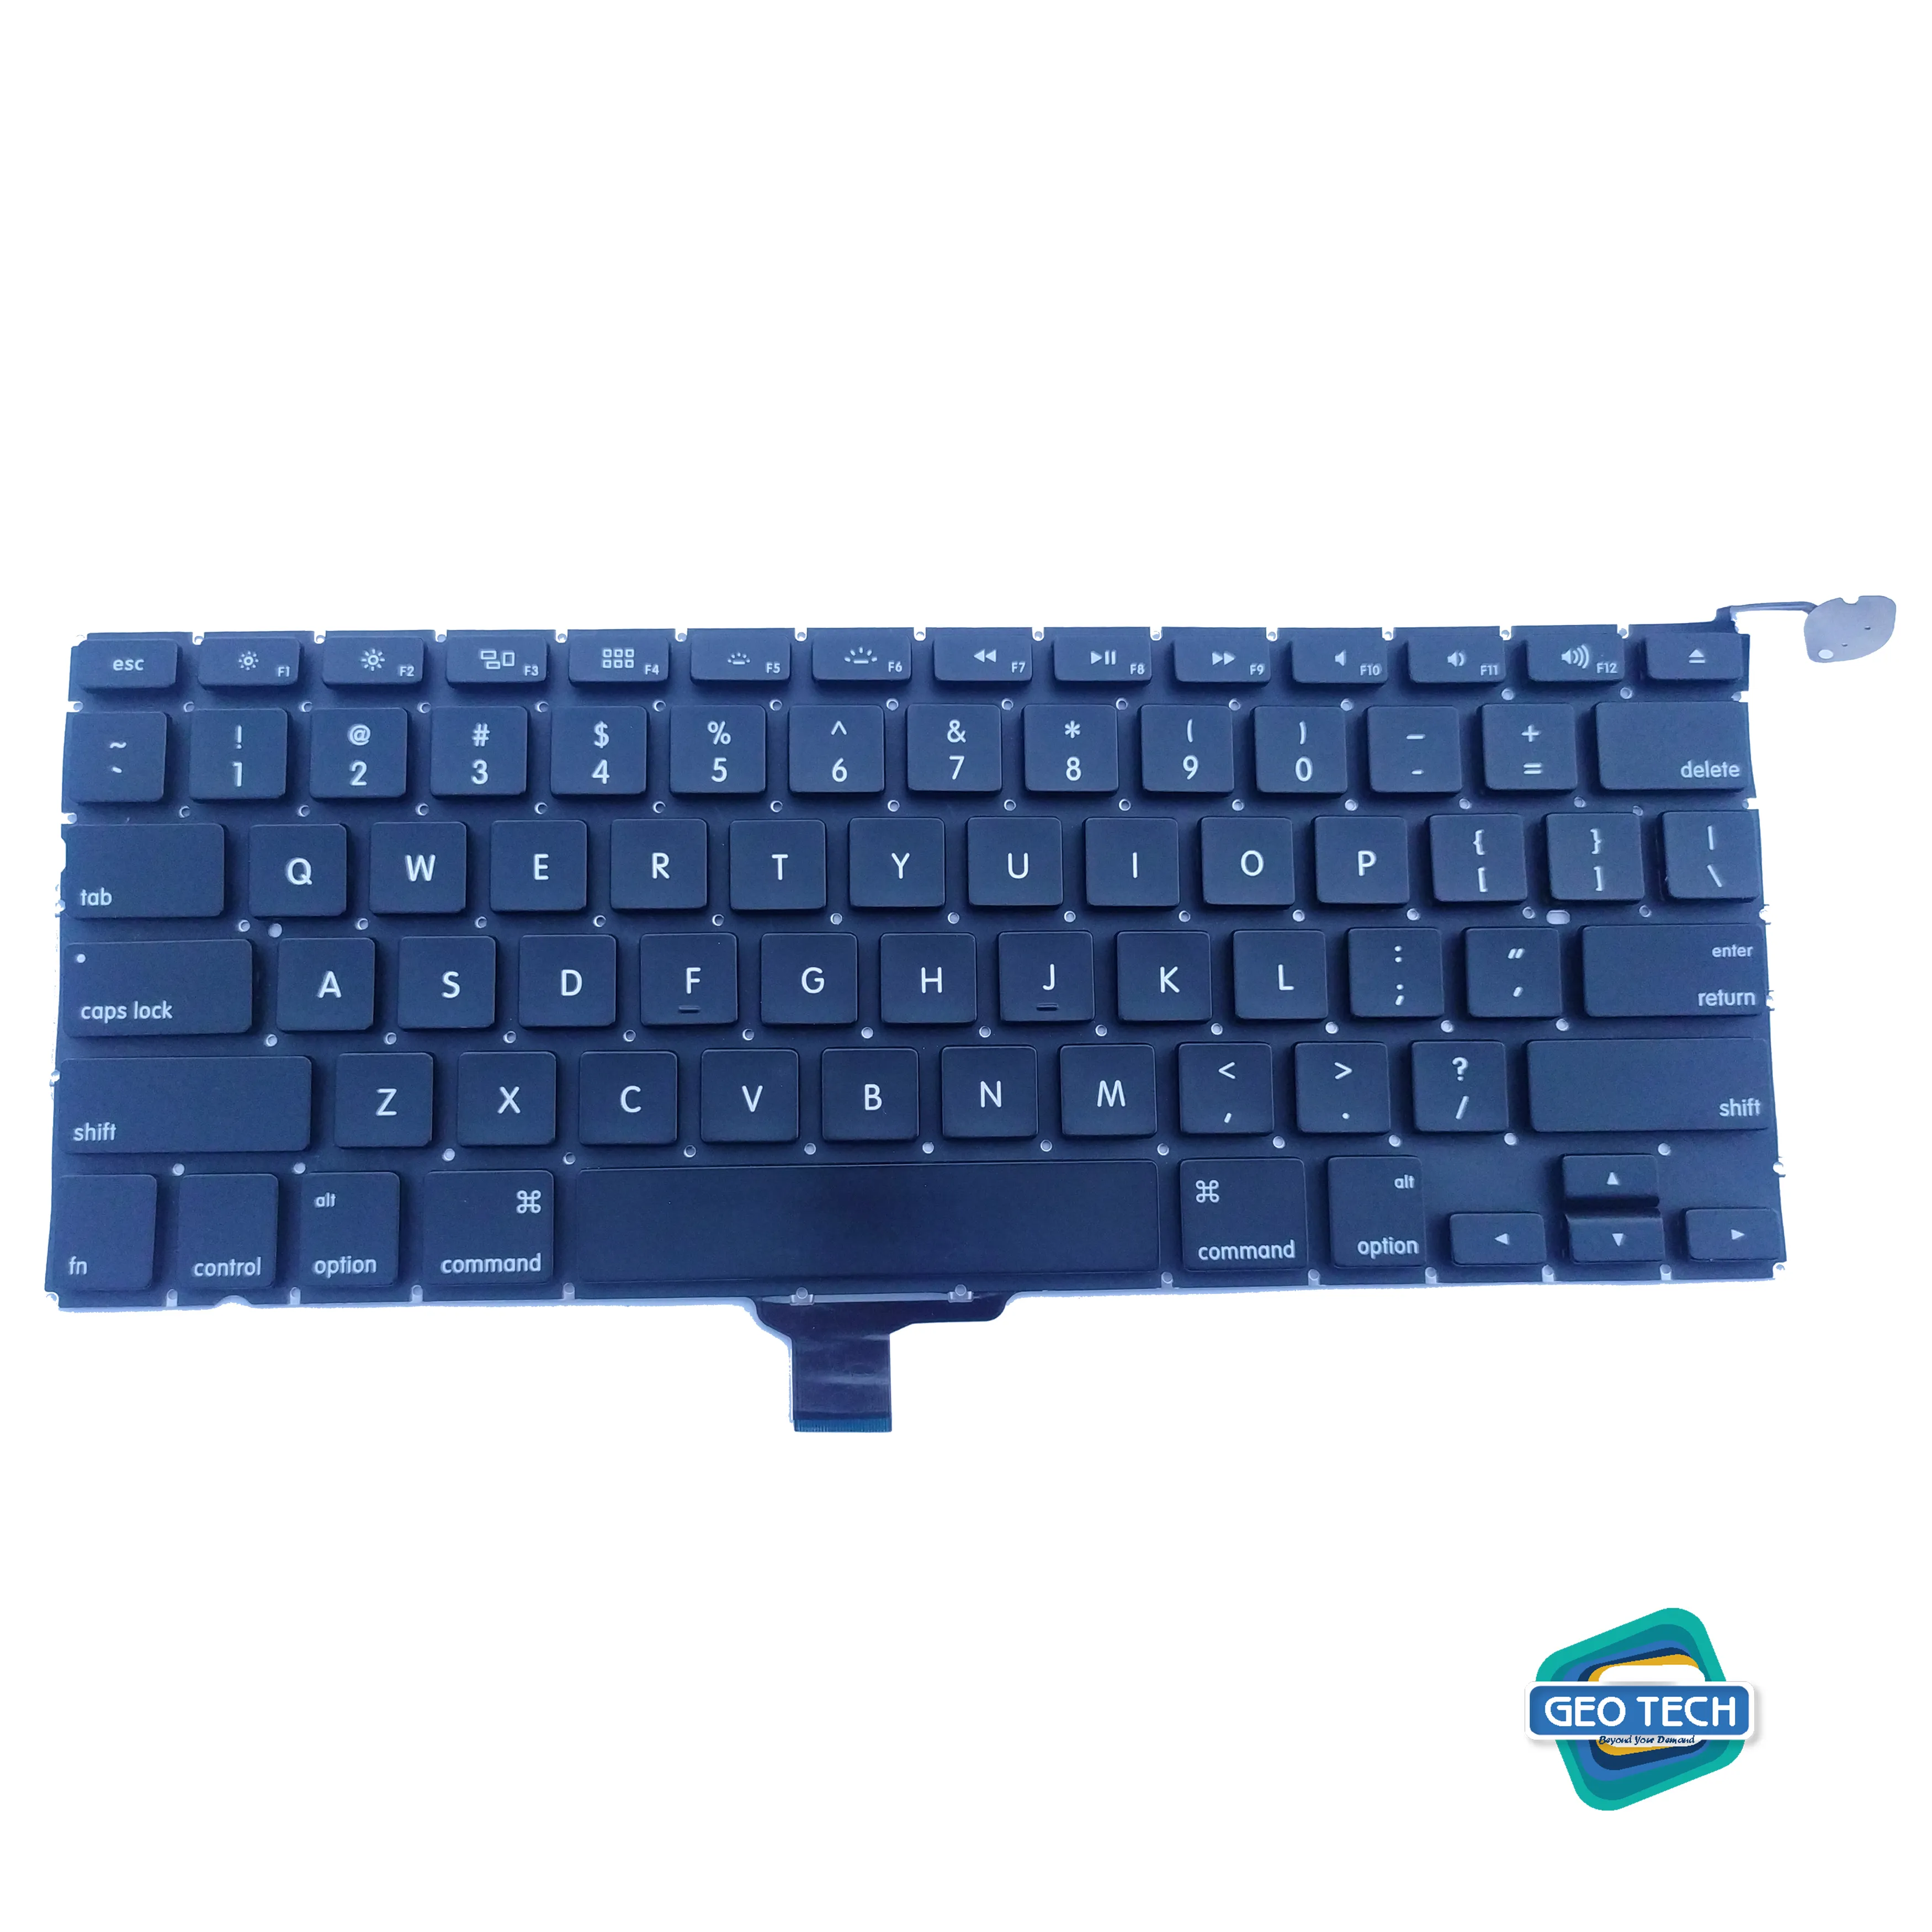 Keyboard for MackBook Pro 13 inch Unibody a1278 Mid 2009, A1278 Mid 2010, A1278 Early 2011, A1278 Late 2011, A1278 Mid 2012